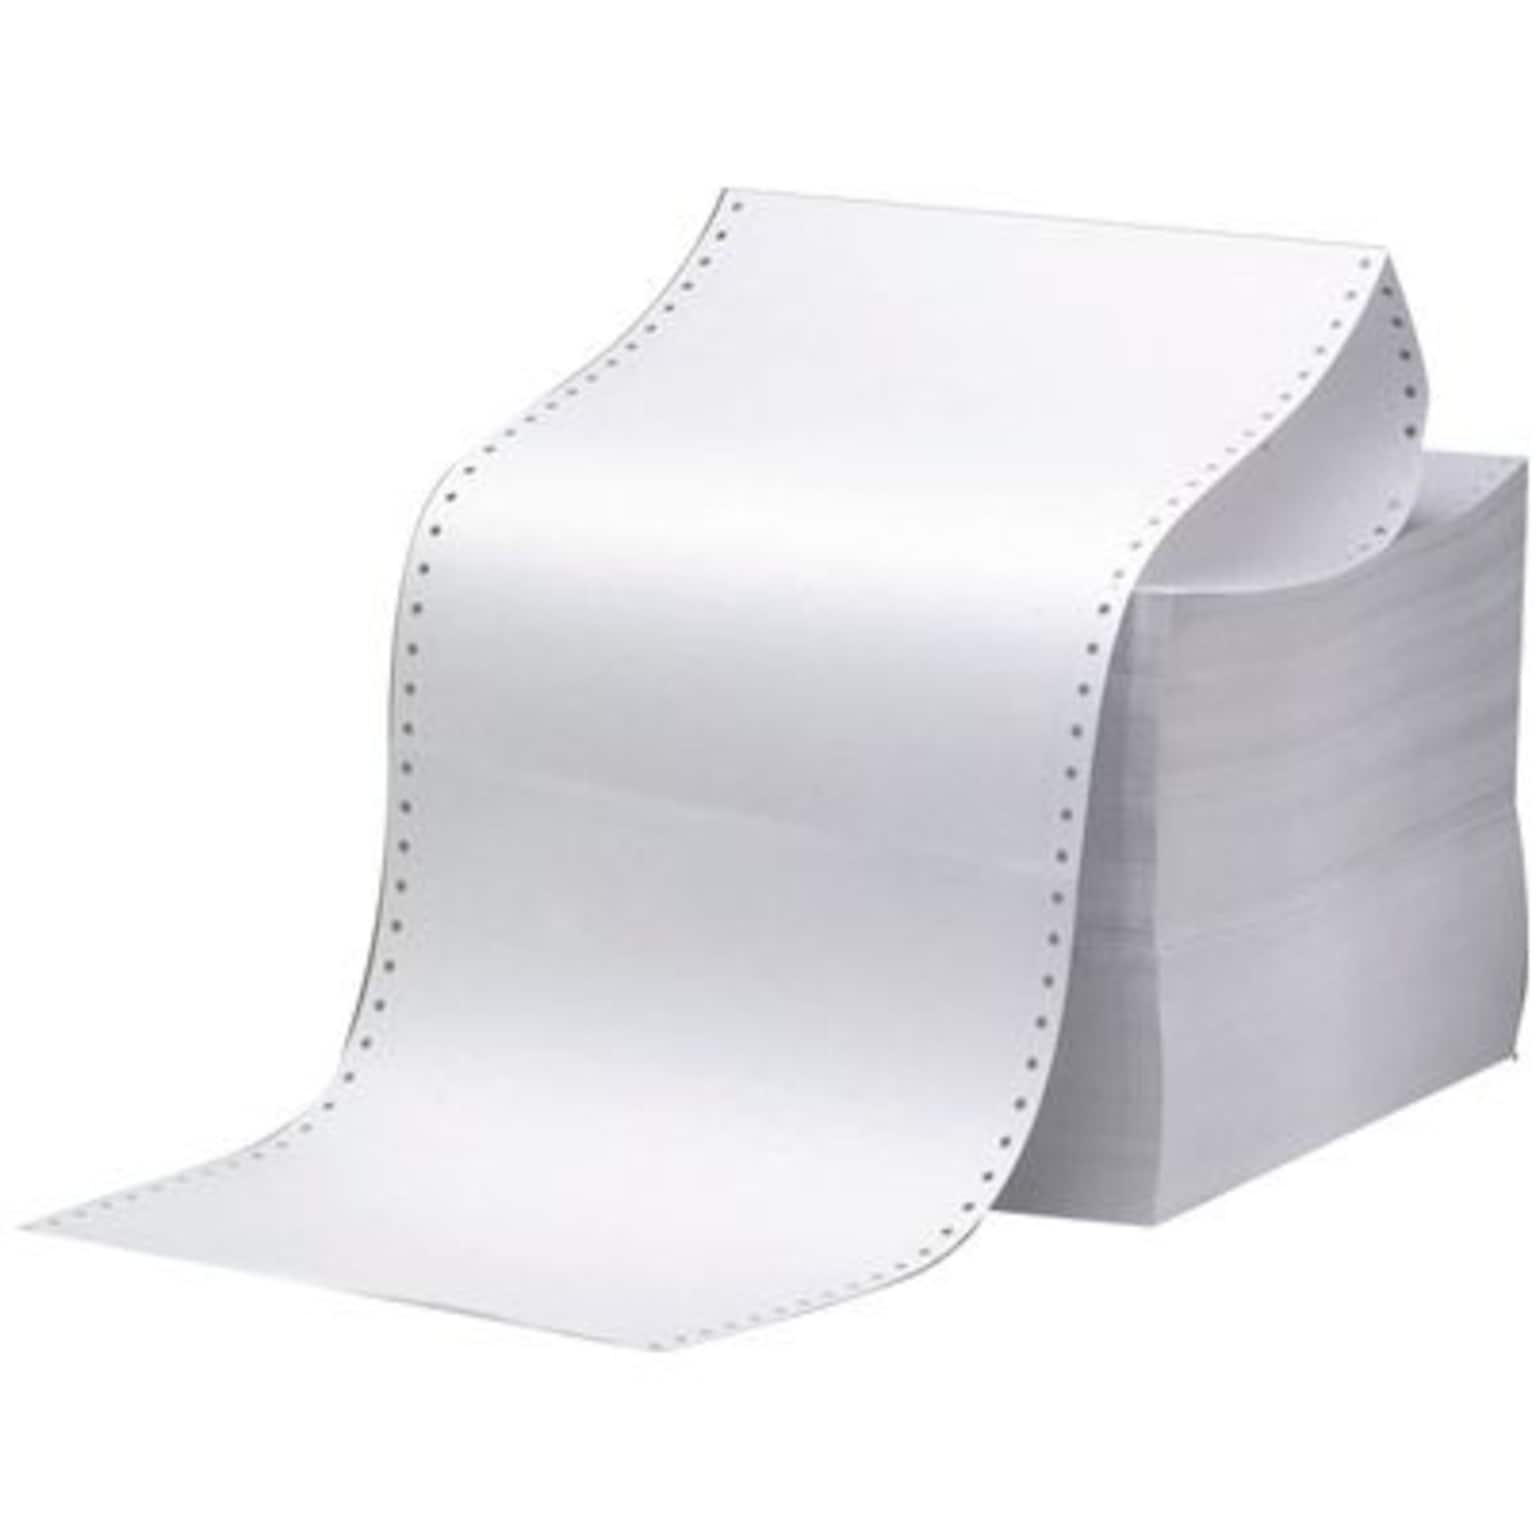 Quill Brand® 12 x 8.5 Continuous Form Paper, 18lbs., 2800 Sheets/Carton (QU710641)